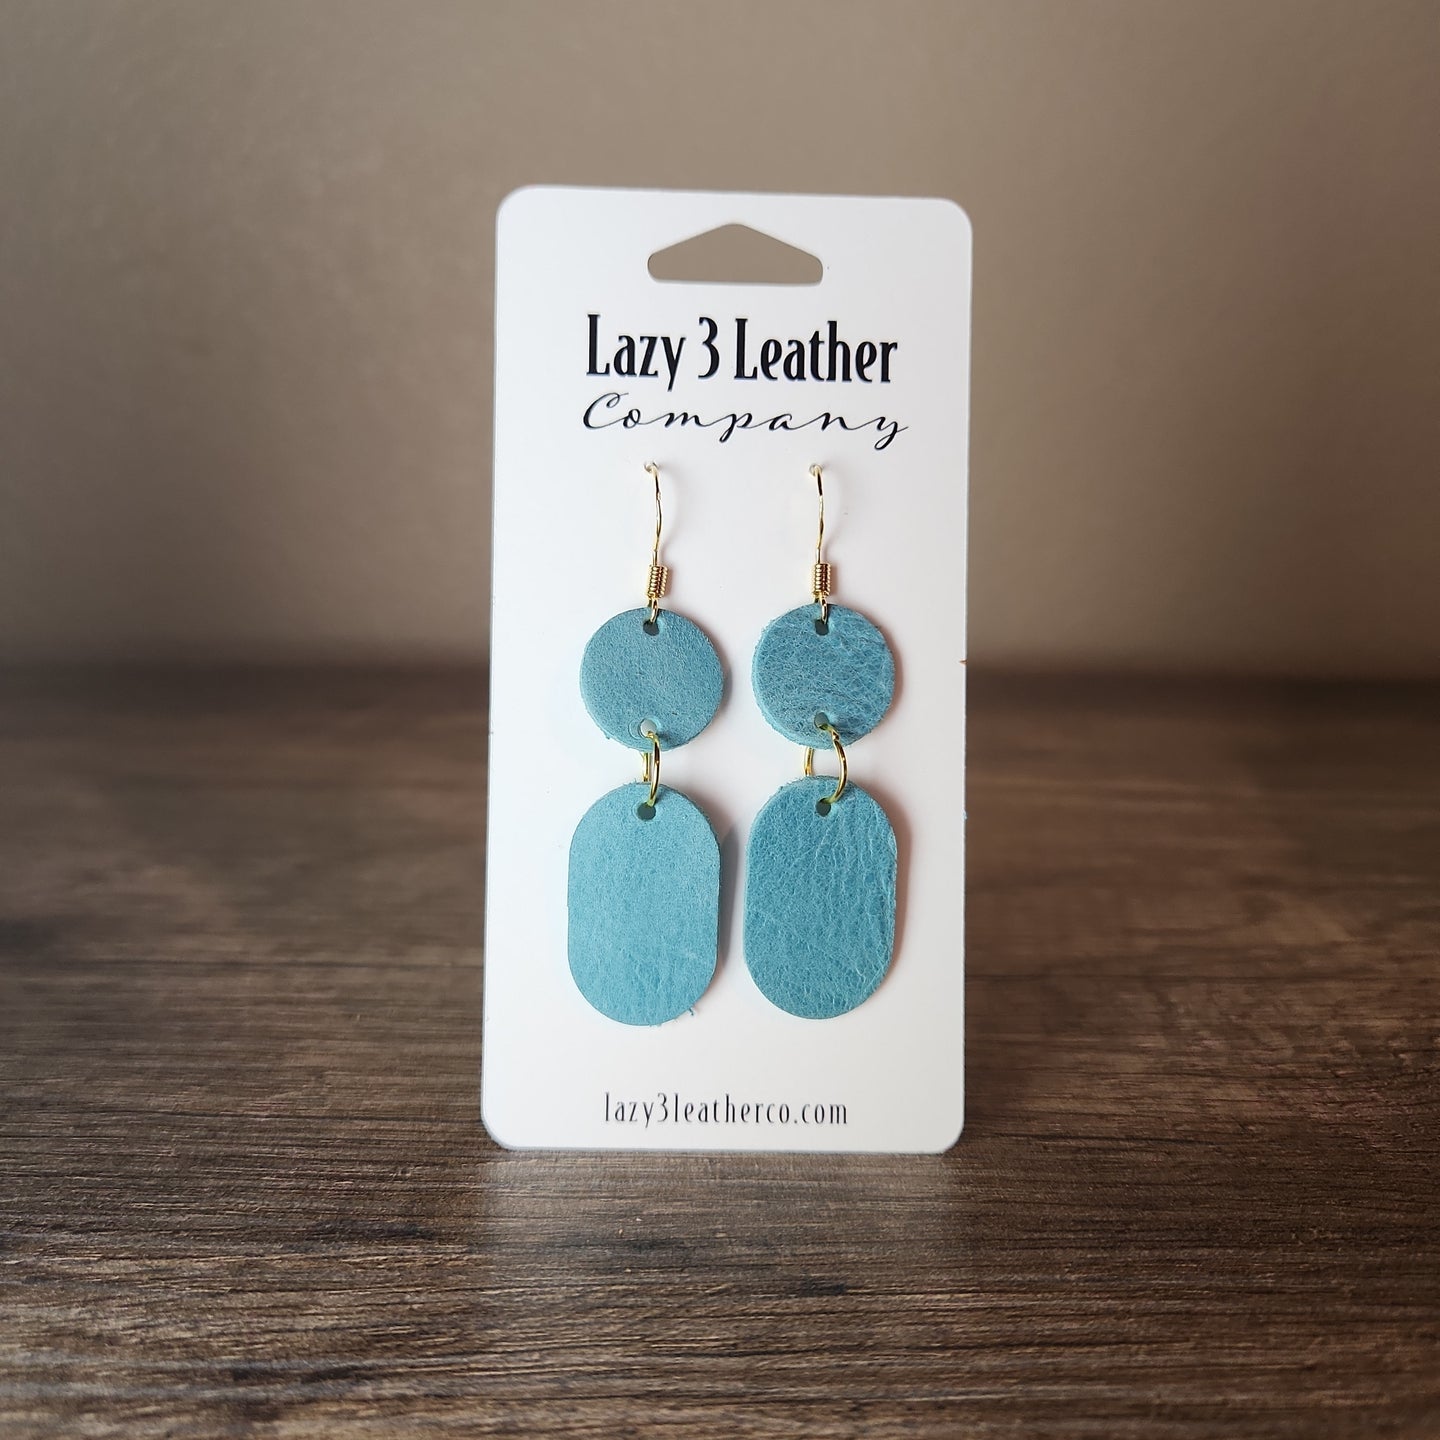 Oval and Circle Earrings - Lazy 3 Leather Company